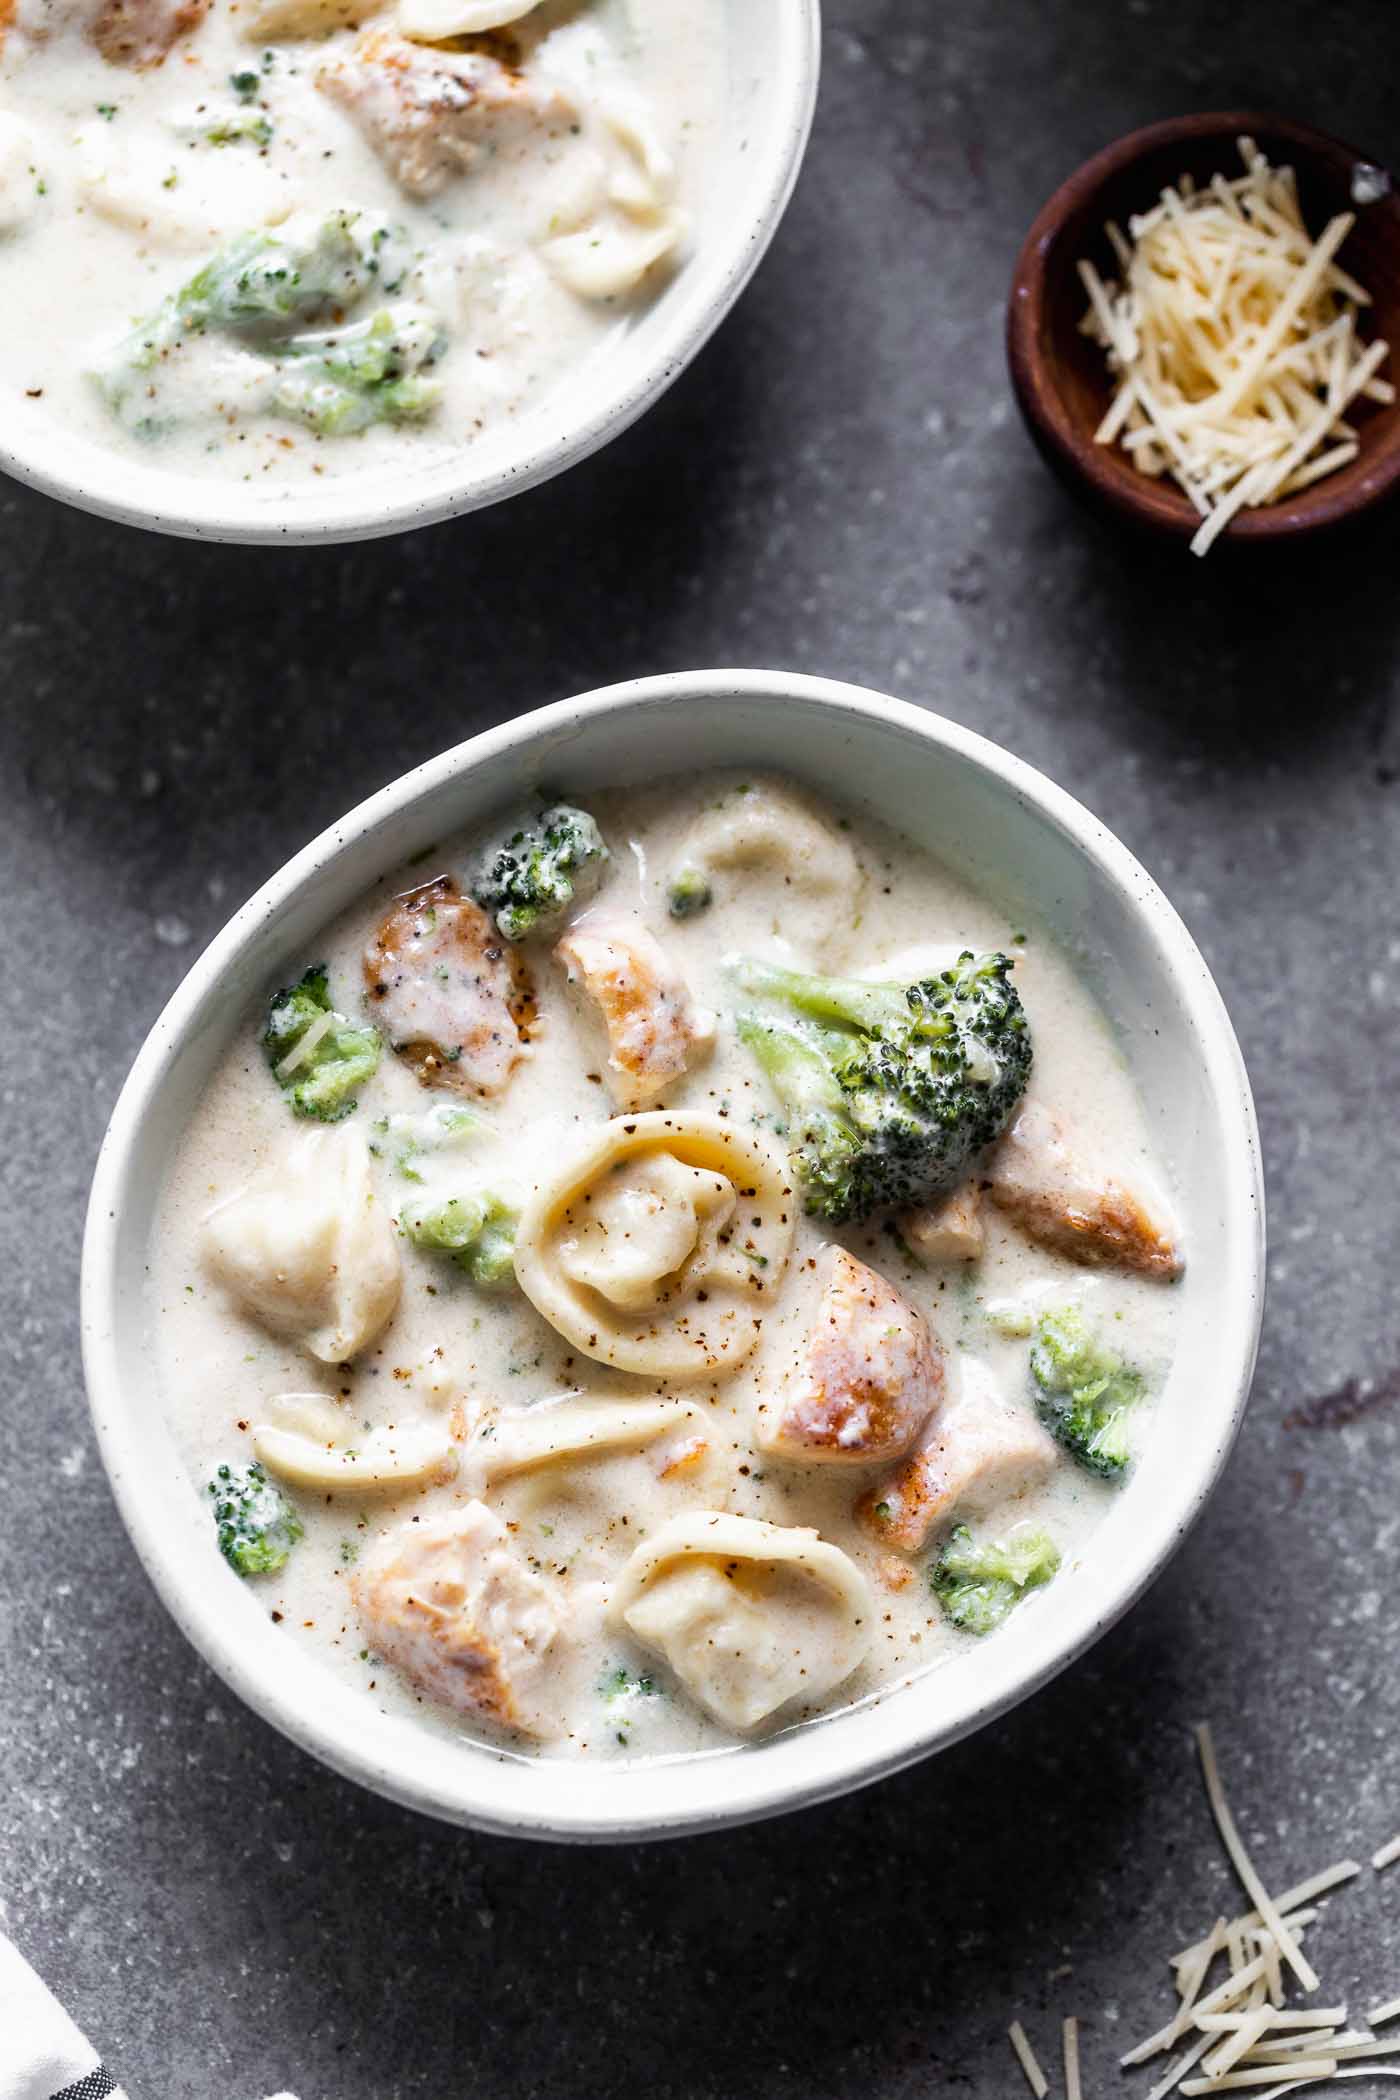 This Easy Chicken Broccoli Alfredo Soup is a one-pot meal perfect for a cold winter night. It’s packed with tender broccoli, a parmesan-laced cream sauce, seared chicken, and cheesy tortellini. Creamy and comforting!